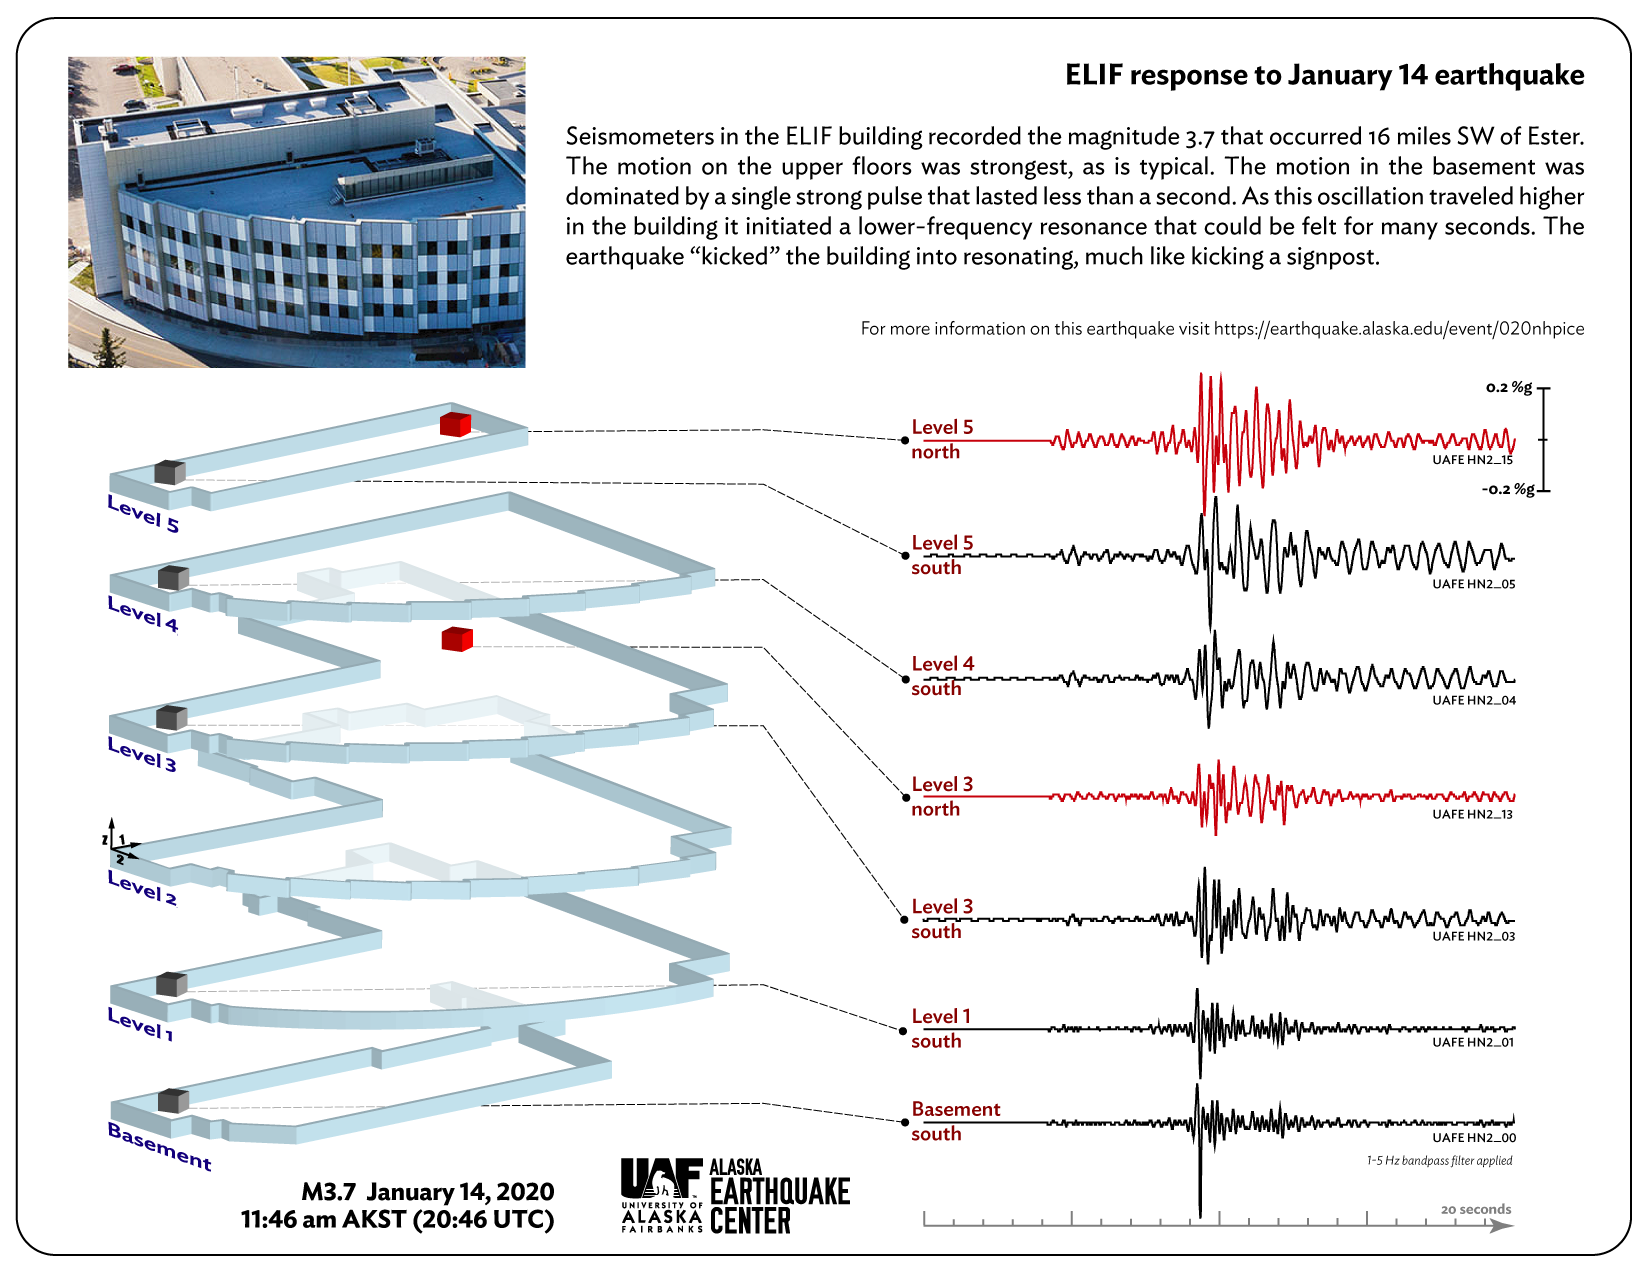 Seismograms from 5 different floors of a building show shortest duration of shaking in the basement, longest shaking on level 5. 